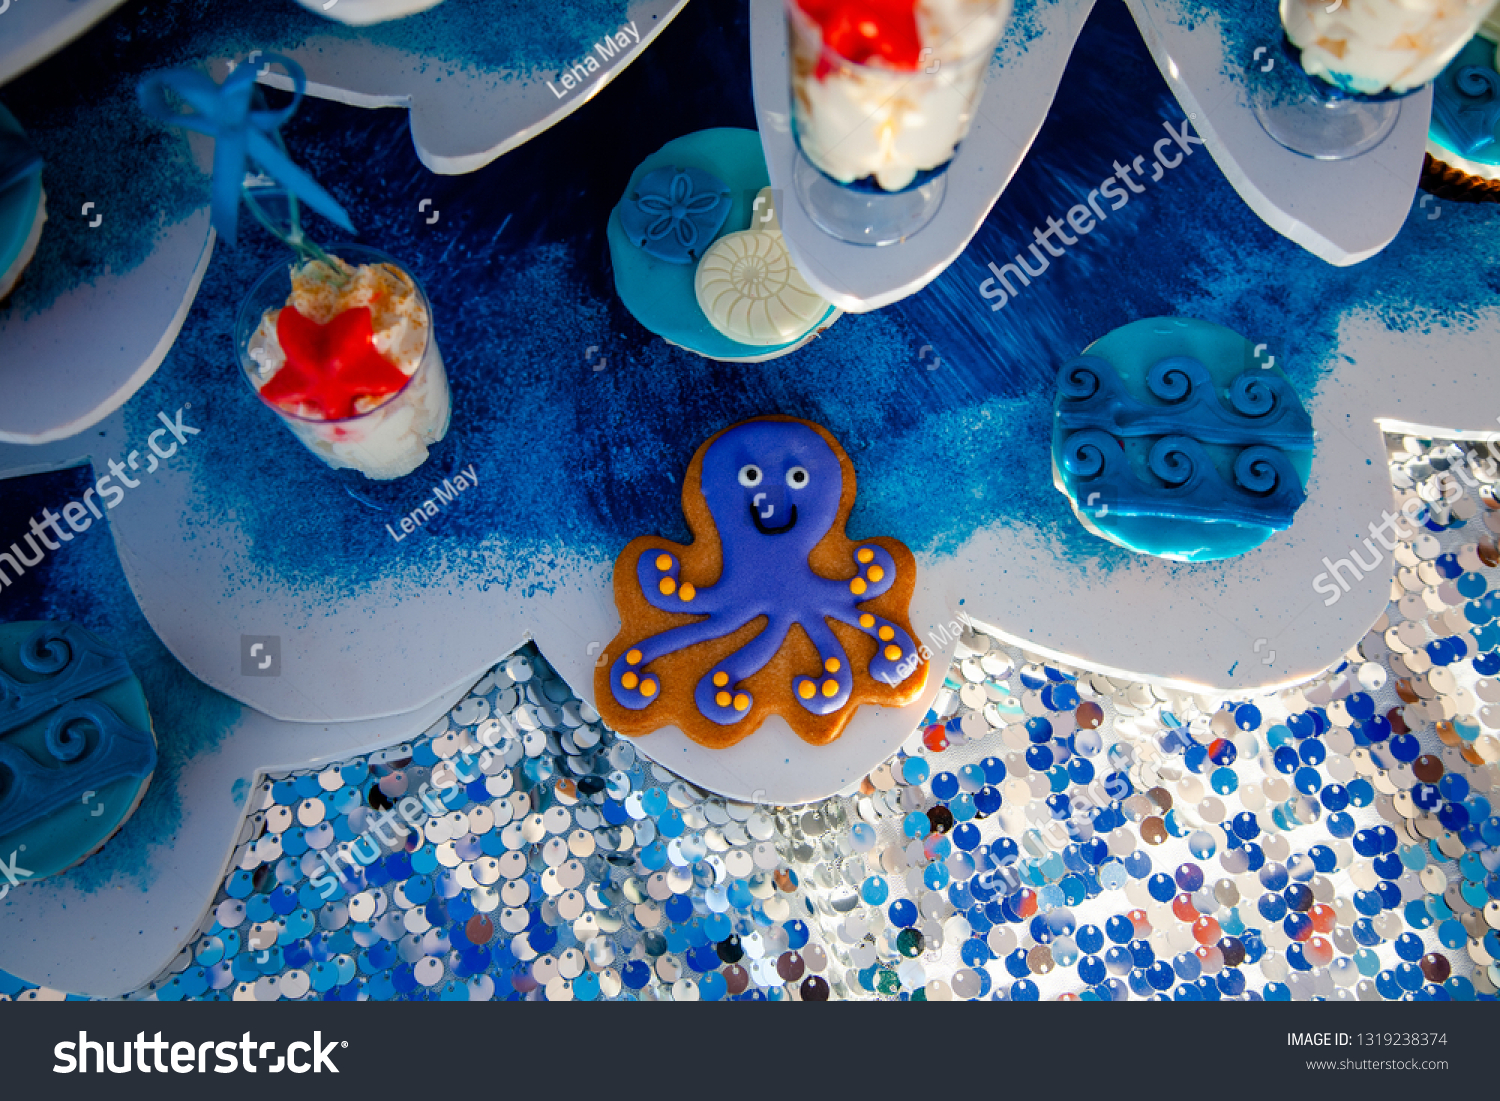 Homemade homemade gingerbread cookies in the form of crab, turtile, octopus and a starfish on the wooden table. Space for text and selective focus. #1319238374